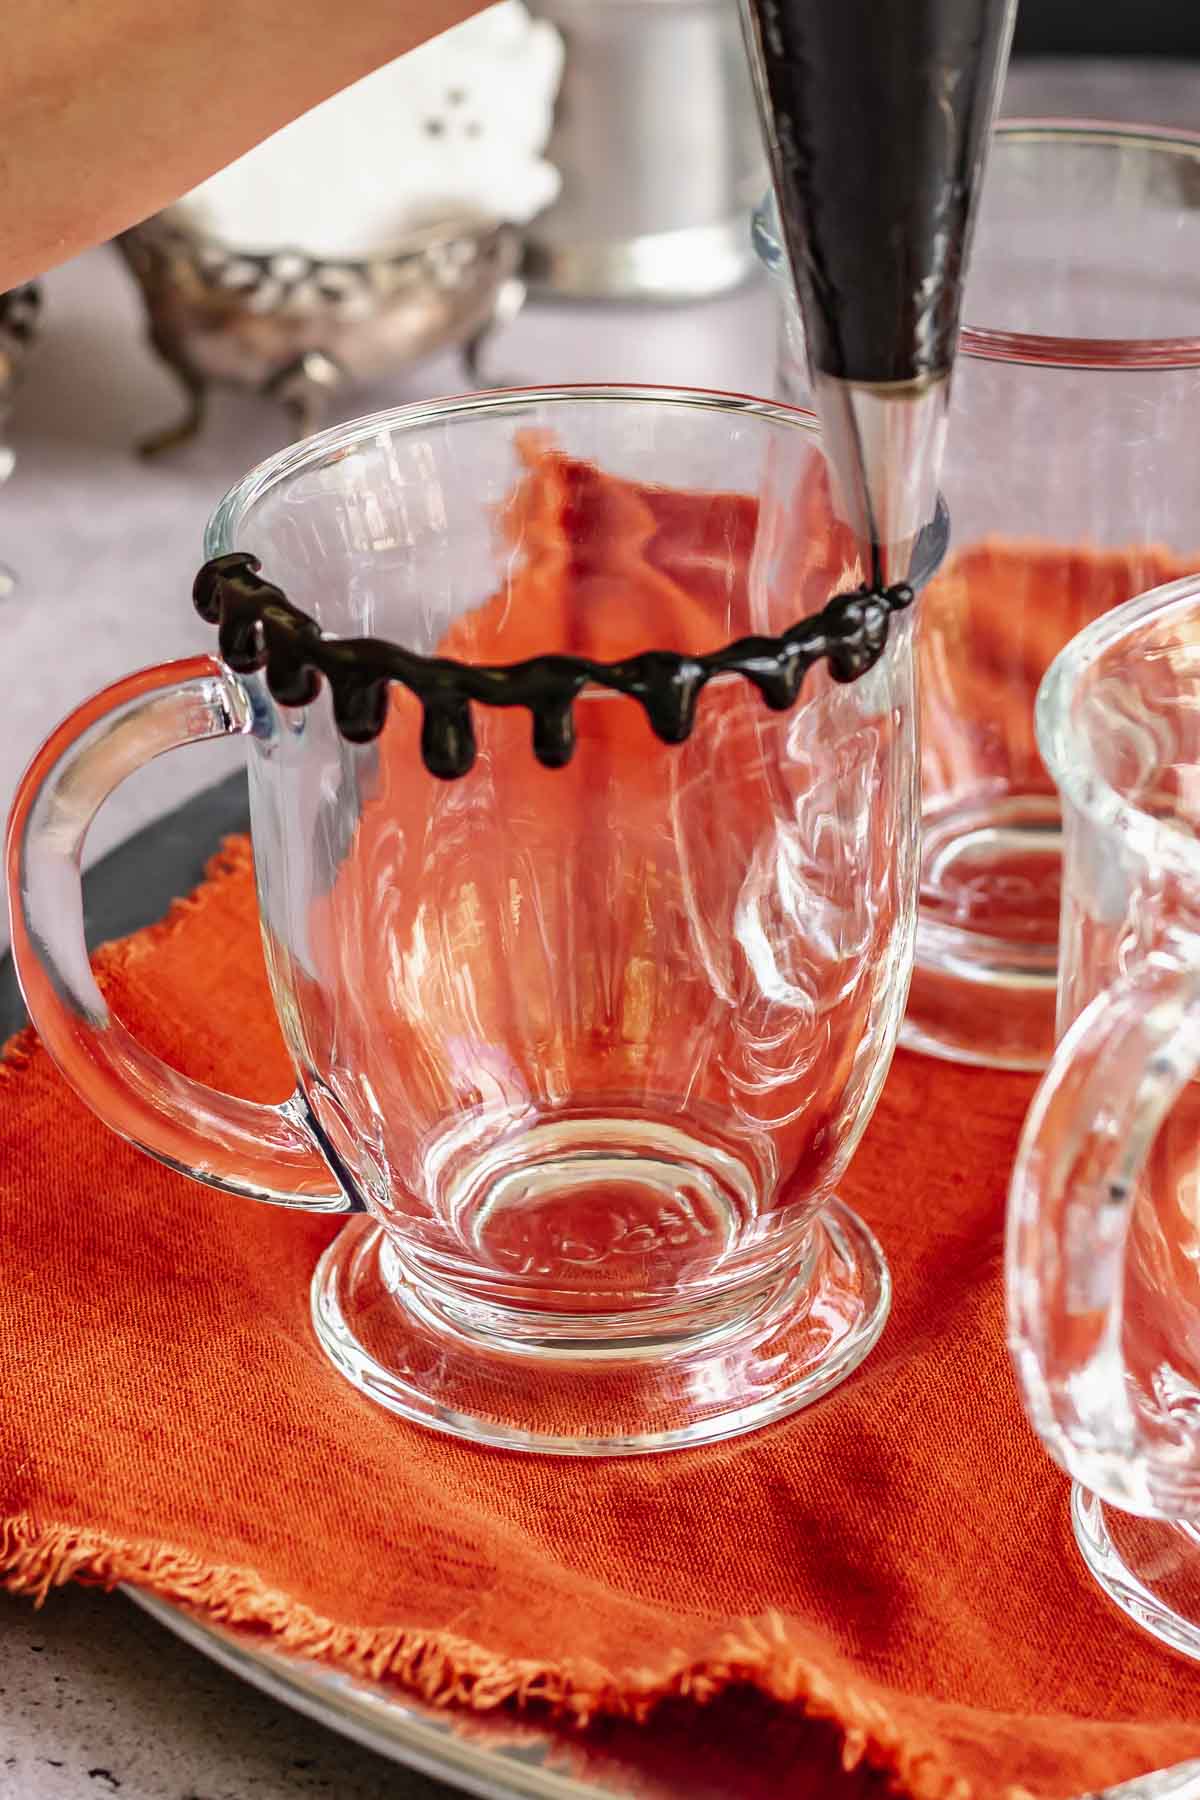 A piping tip adds drips of black hot fudge onto the rim of a clear mug.